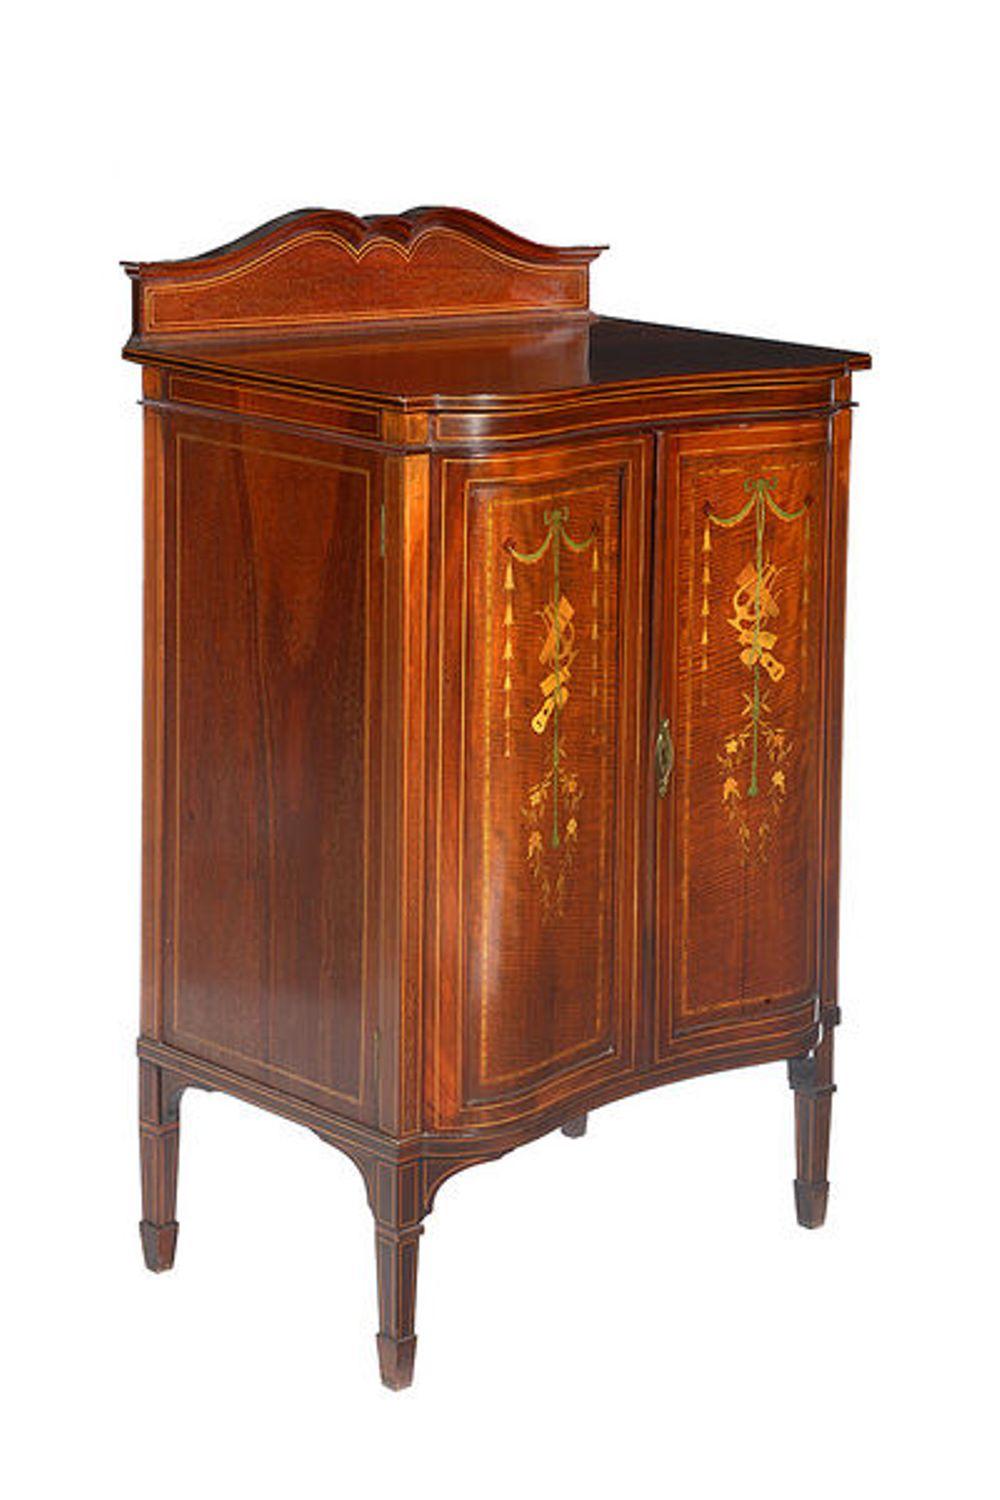 A mahogany and satinwood marquetry Edwardian two-door music cabinet.

The inverted serpentine shaped top with a raised back and a pair of arched cabinet doors inlaid with satinwood musical emblems, garlands and bell flowers. 

The doors open to